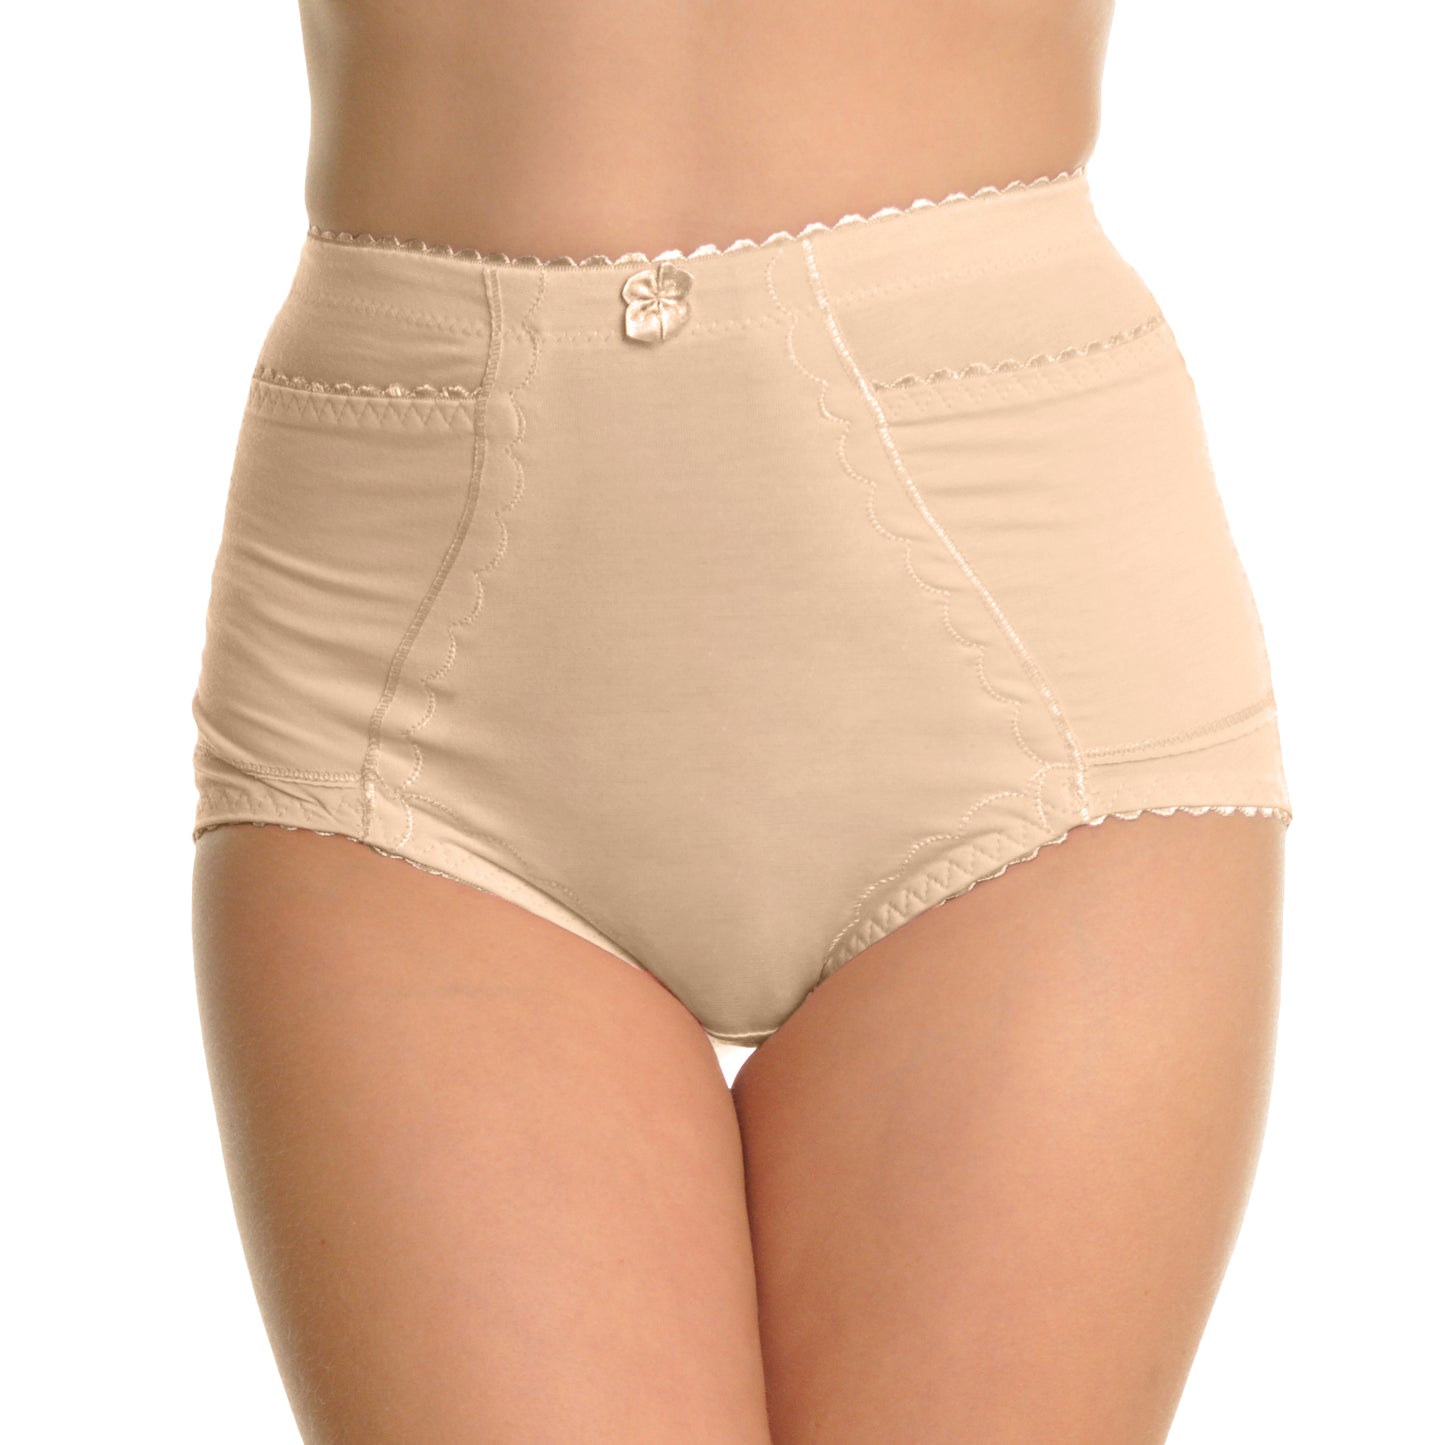 Angelina Cotton High-Waisted Double Pocket Girdles (12-Pack), #G901